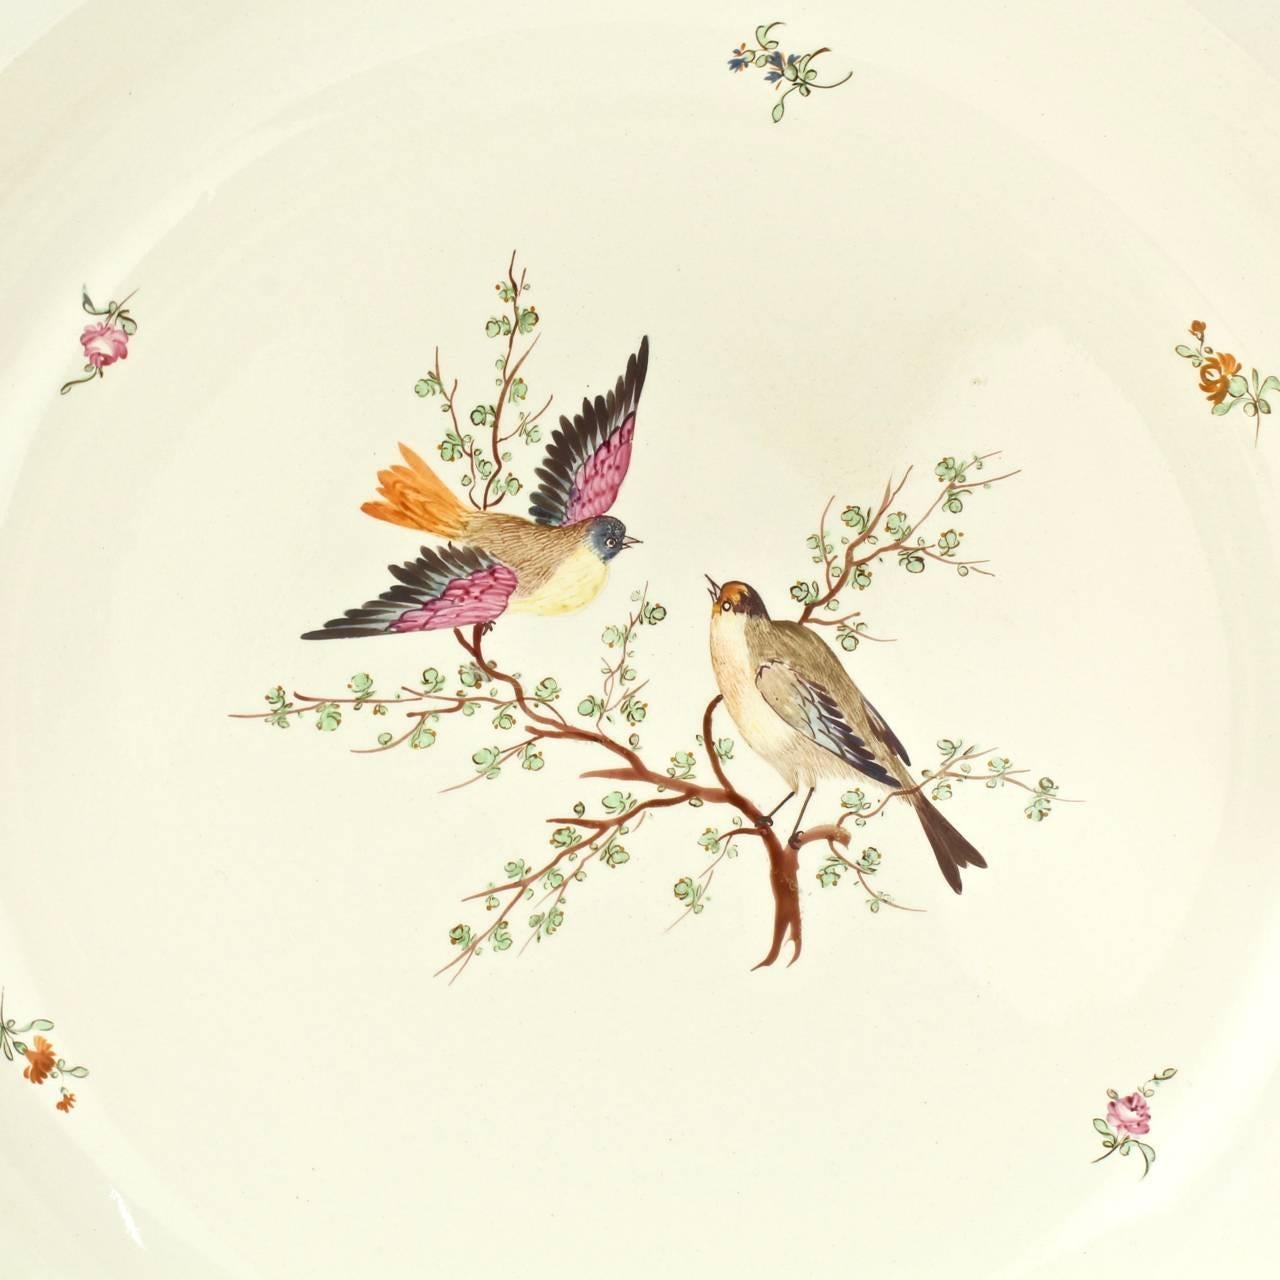 Regency Very Large Antique Early 19th Century Wedgwood Creamware Bowl with Bird Design